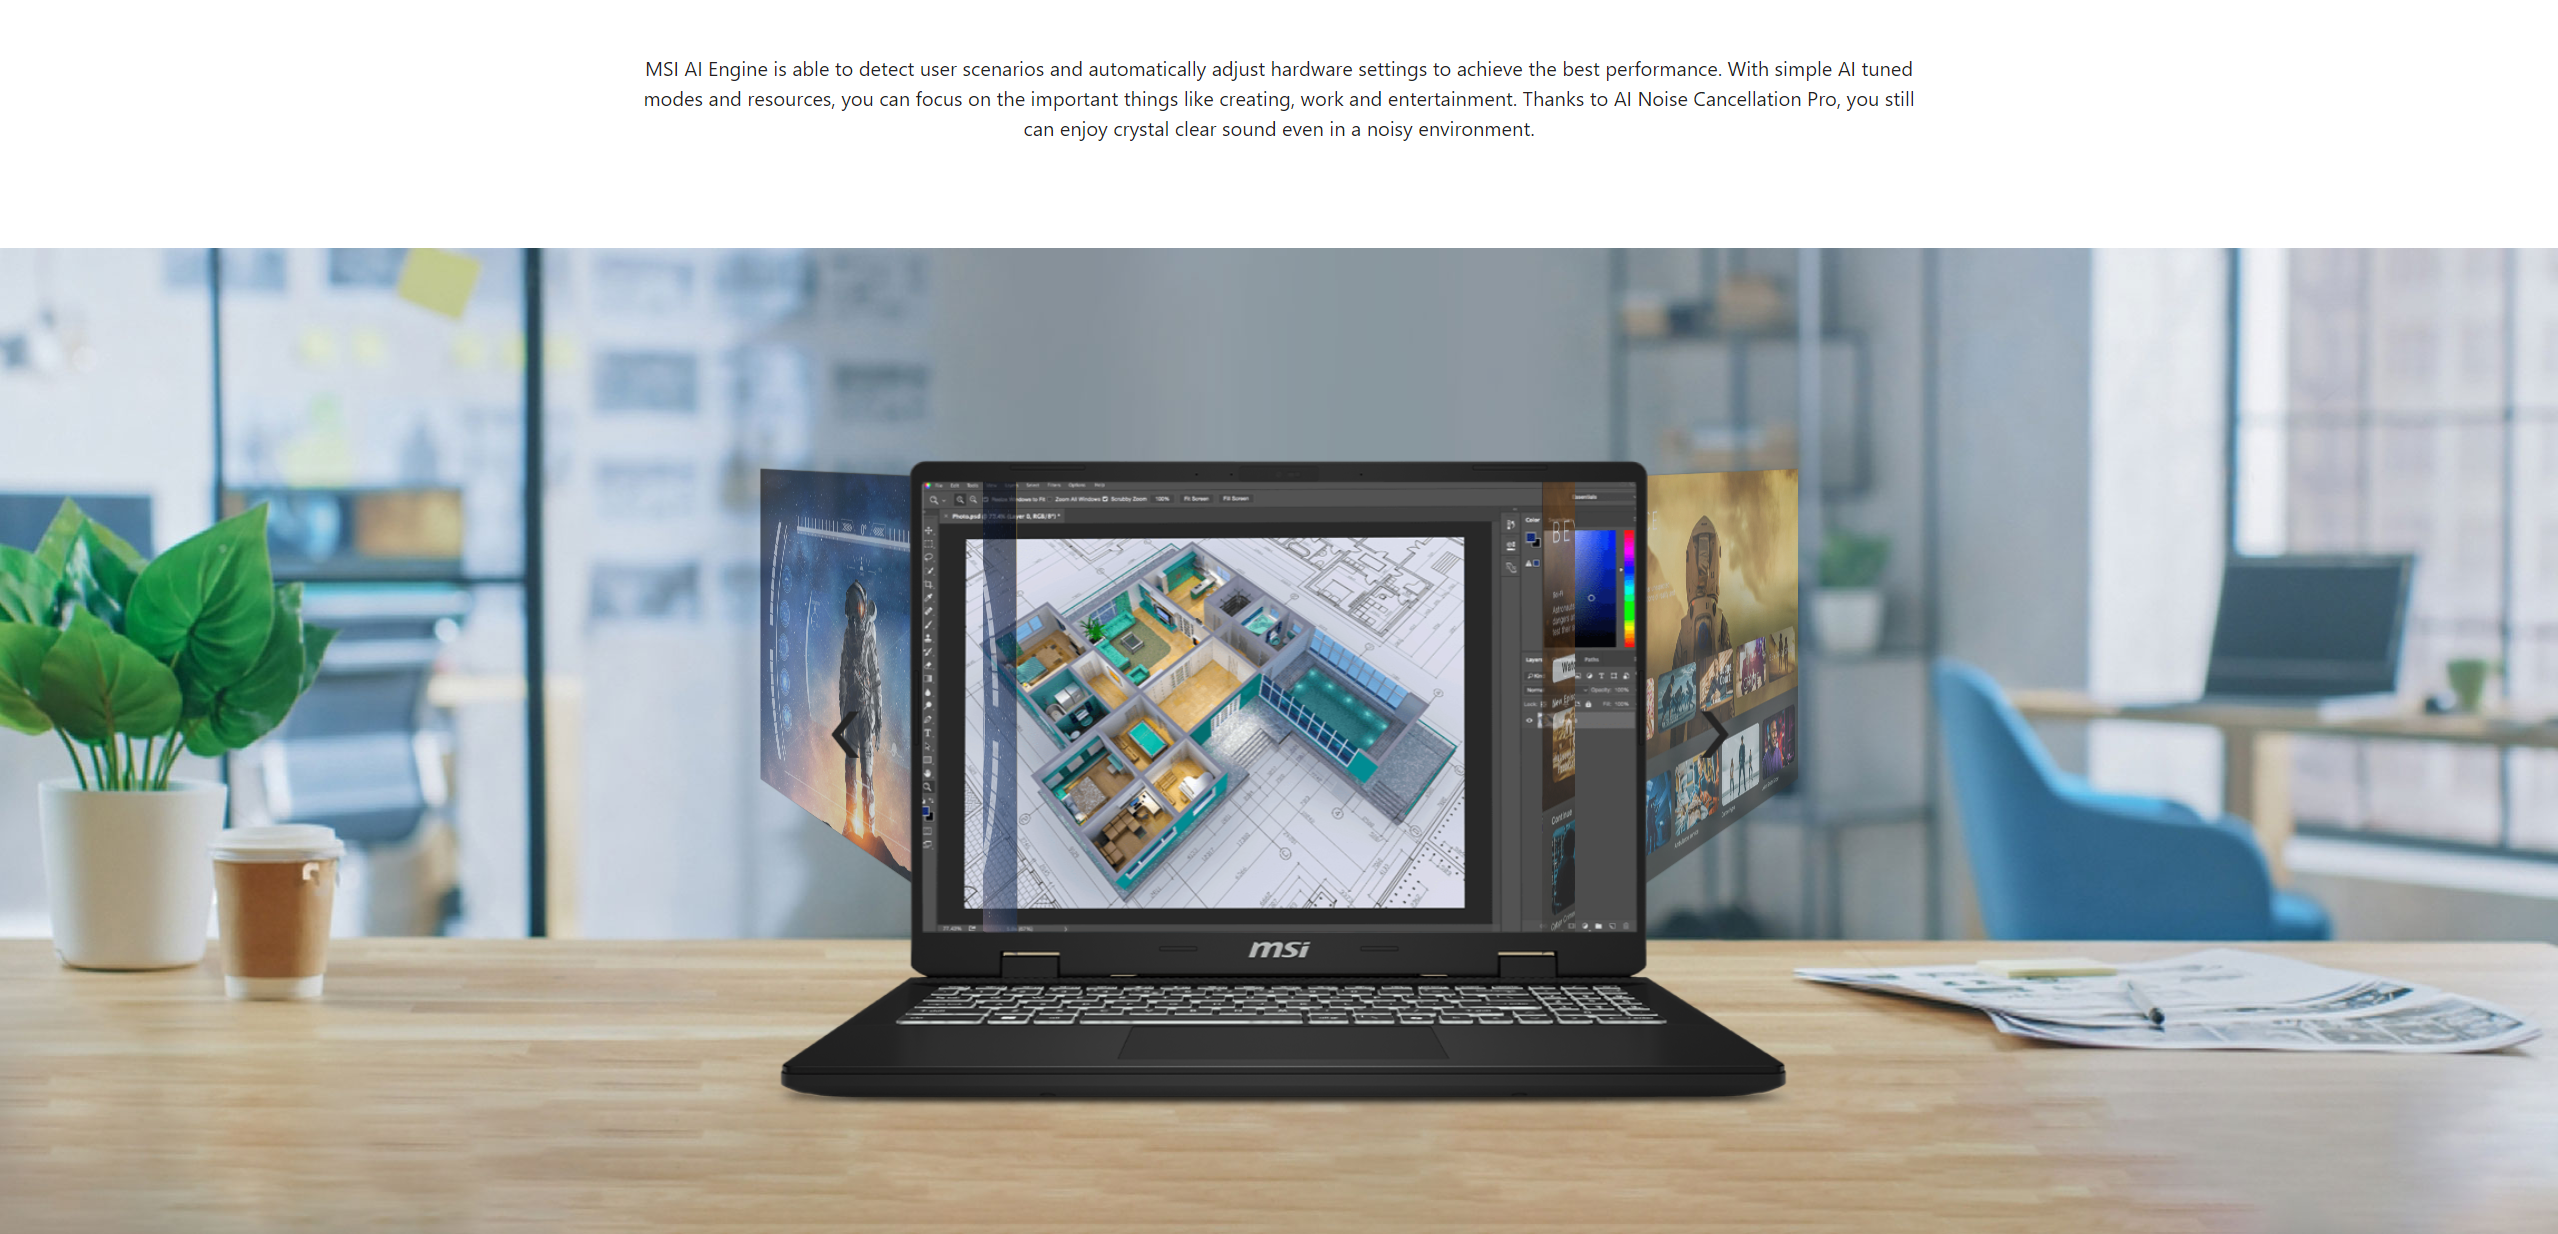 MSI Laptops now accelerate work and play even faster and more efficiently than ever before. They come standard with exclusive MSI Intelligent Technology that is capable of providing whole new Intelligent features, taking automatic tuning to a whole new level.